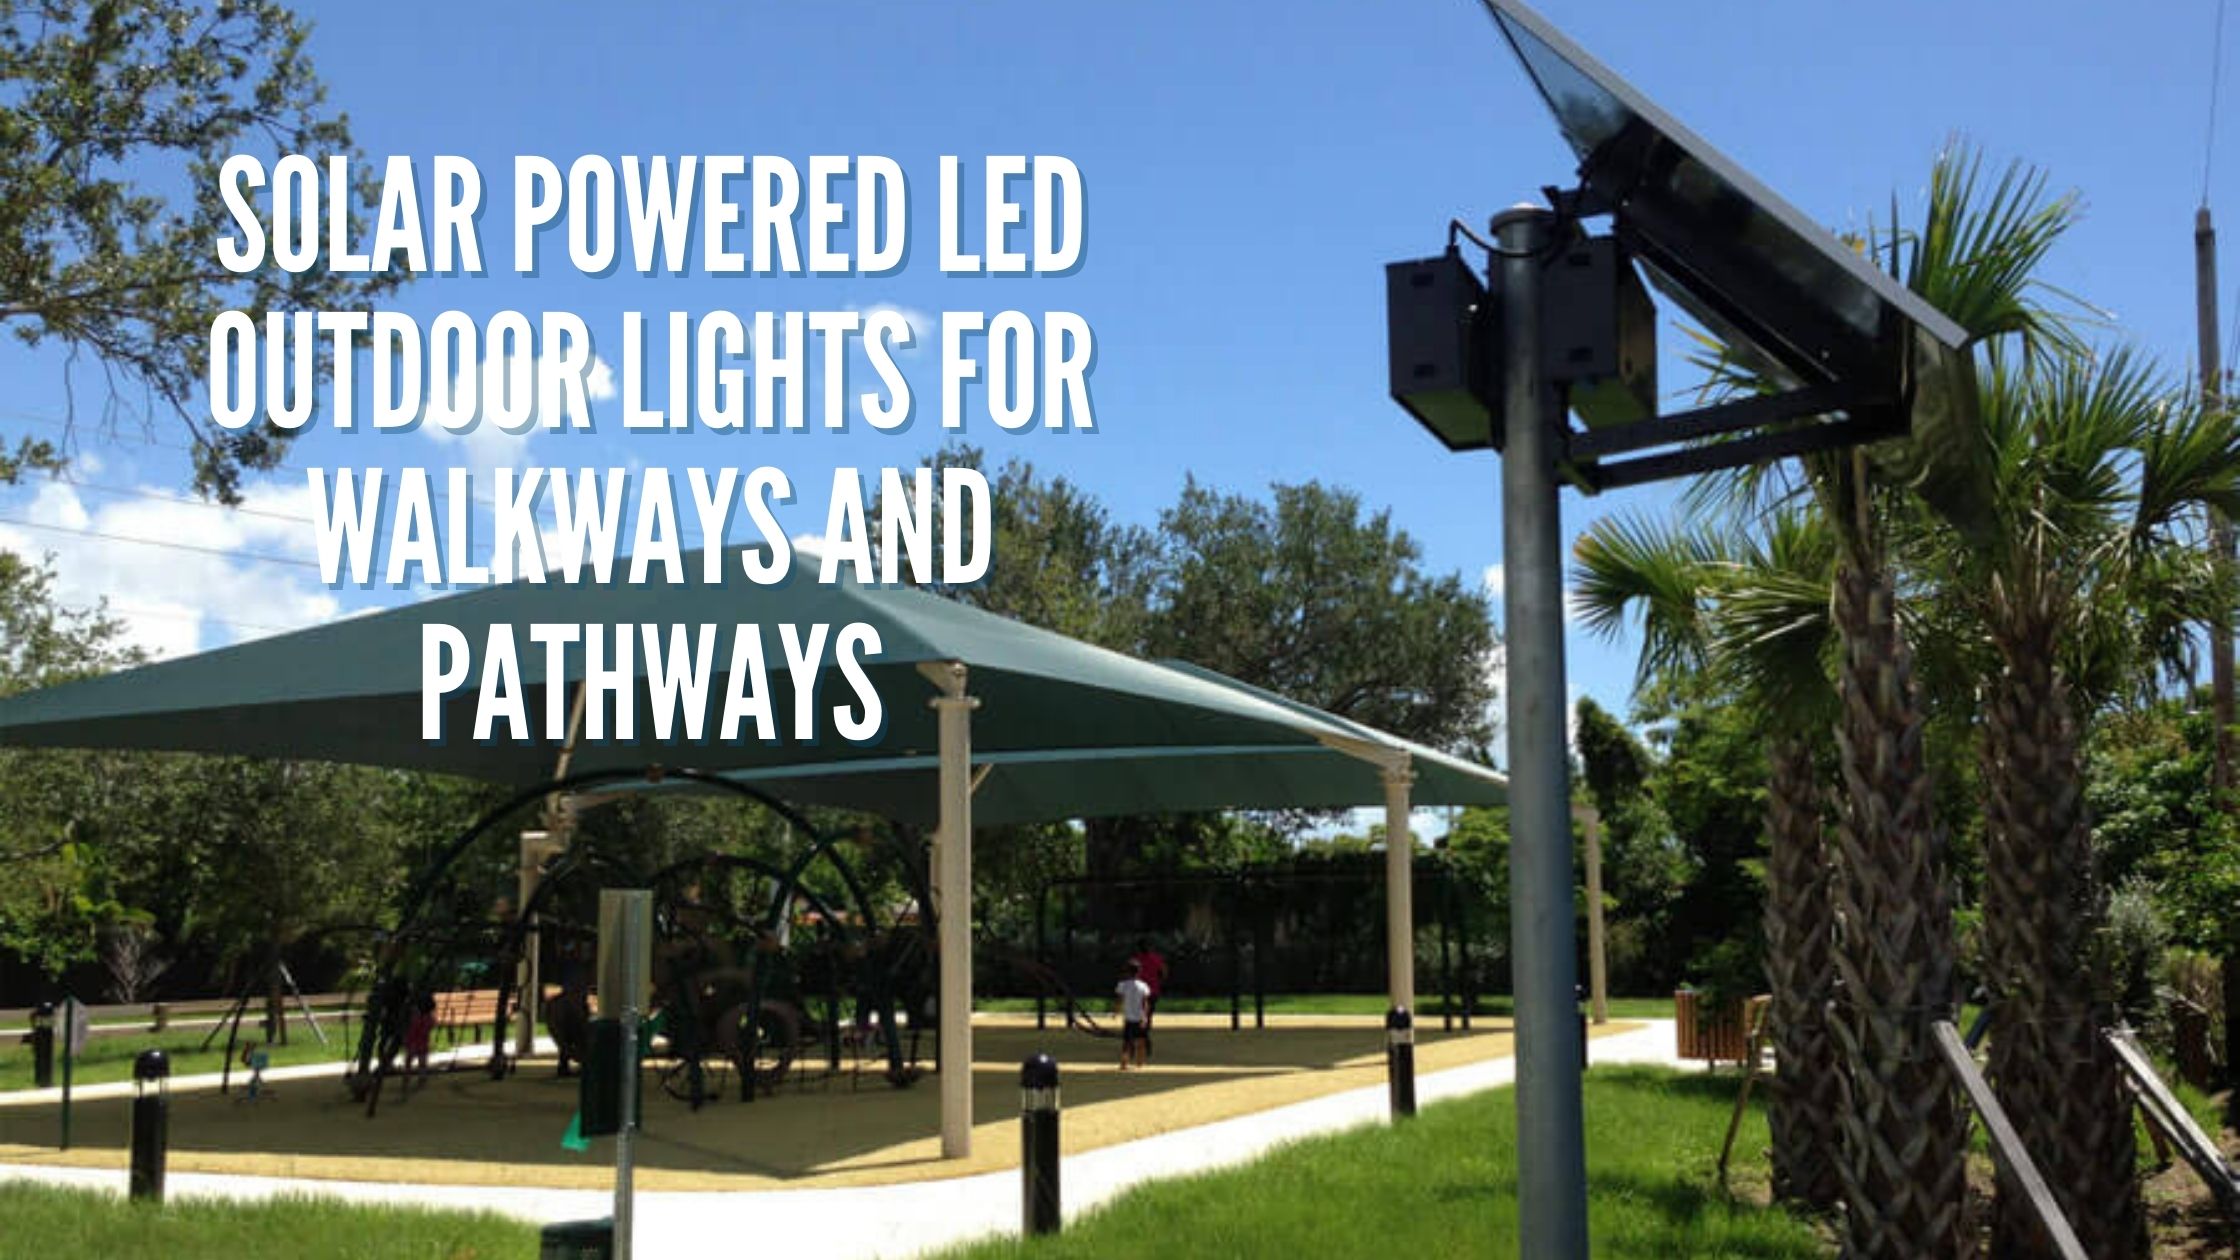 Solar Powered LED Outdoor Lights for Walkways and Pathways